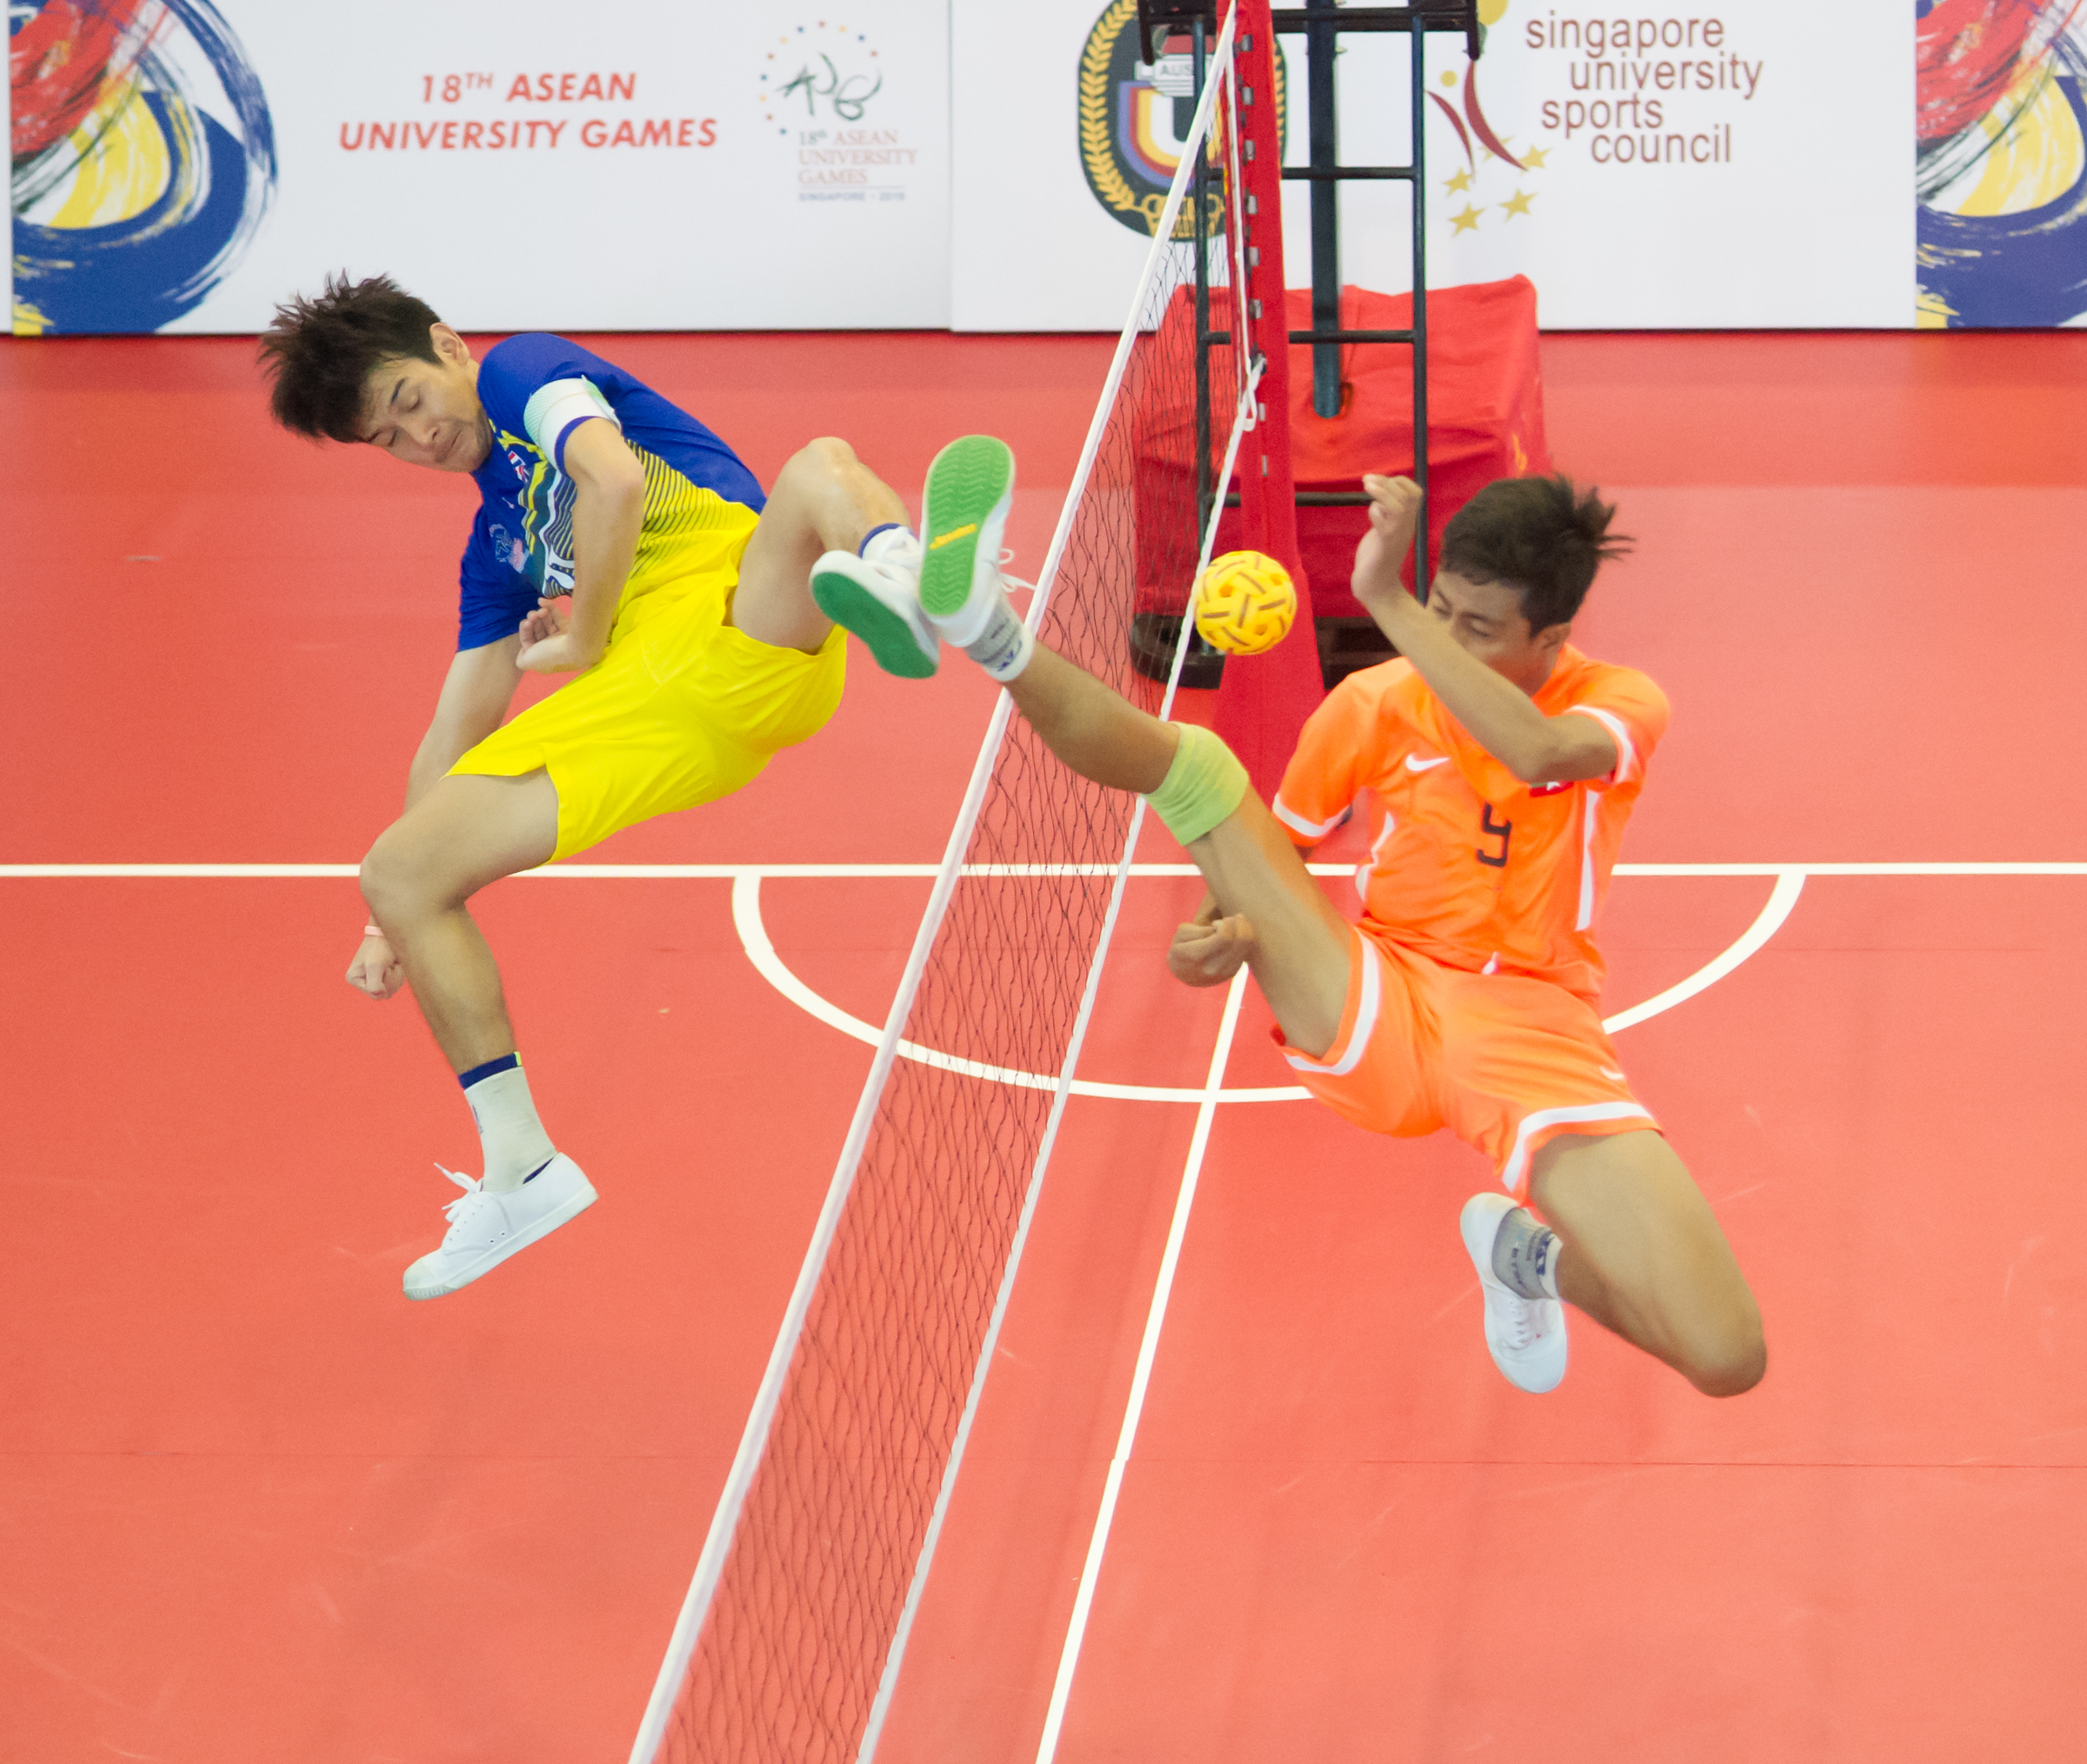 A Thai and Myanmar player in action during the sepak takraw competition of the ASEAN University Games at the Bedok Sports Hall.